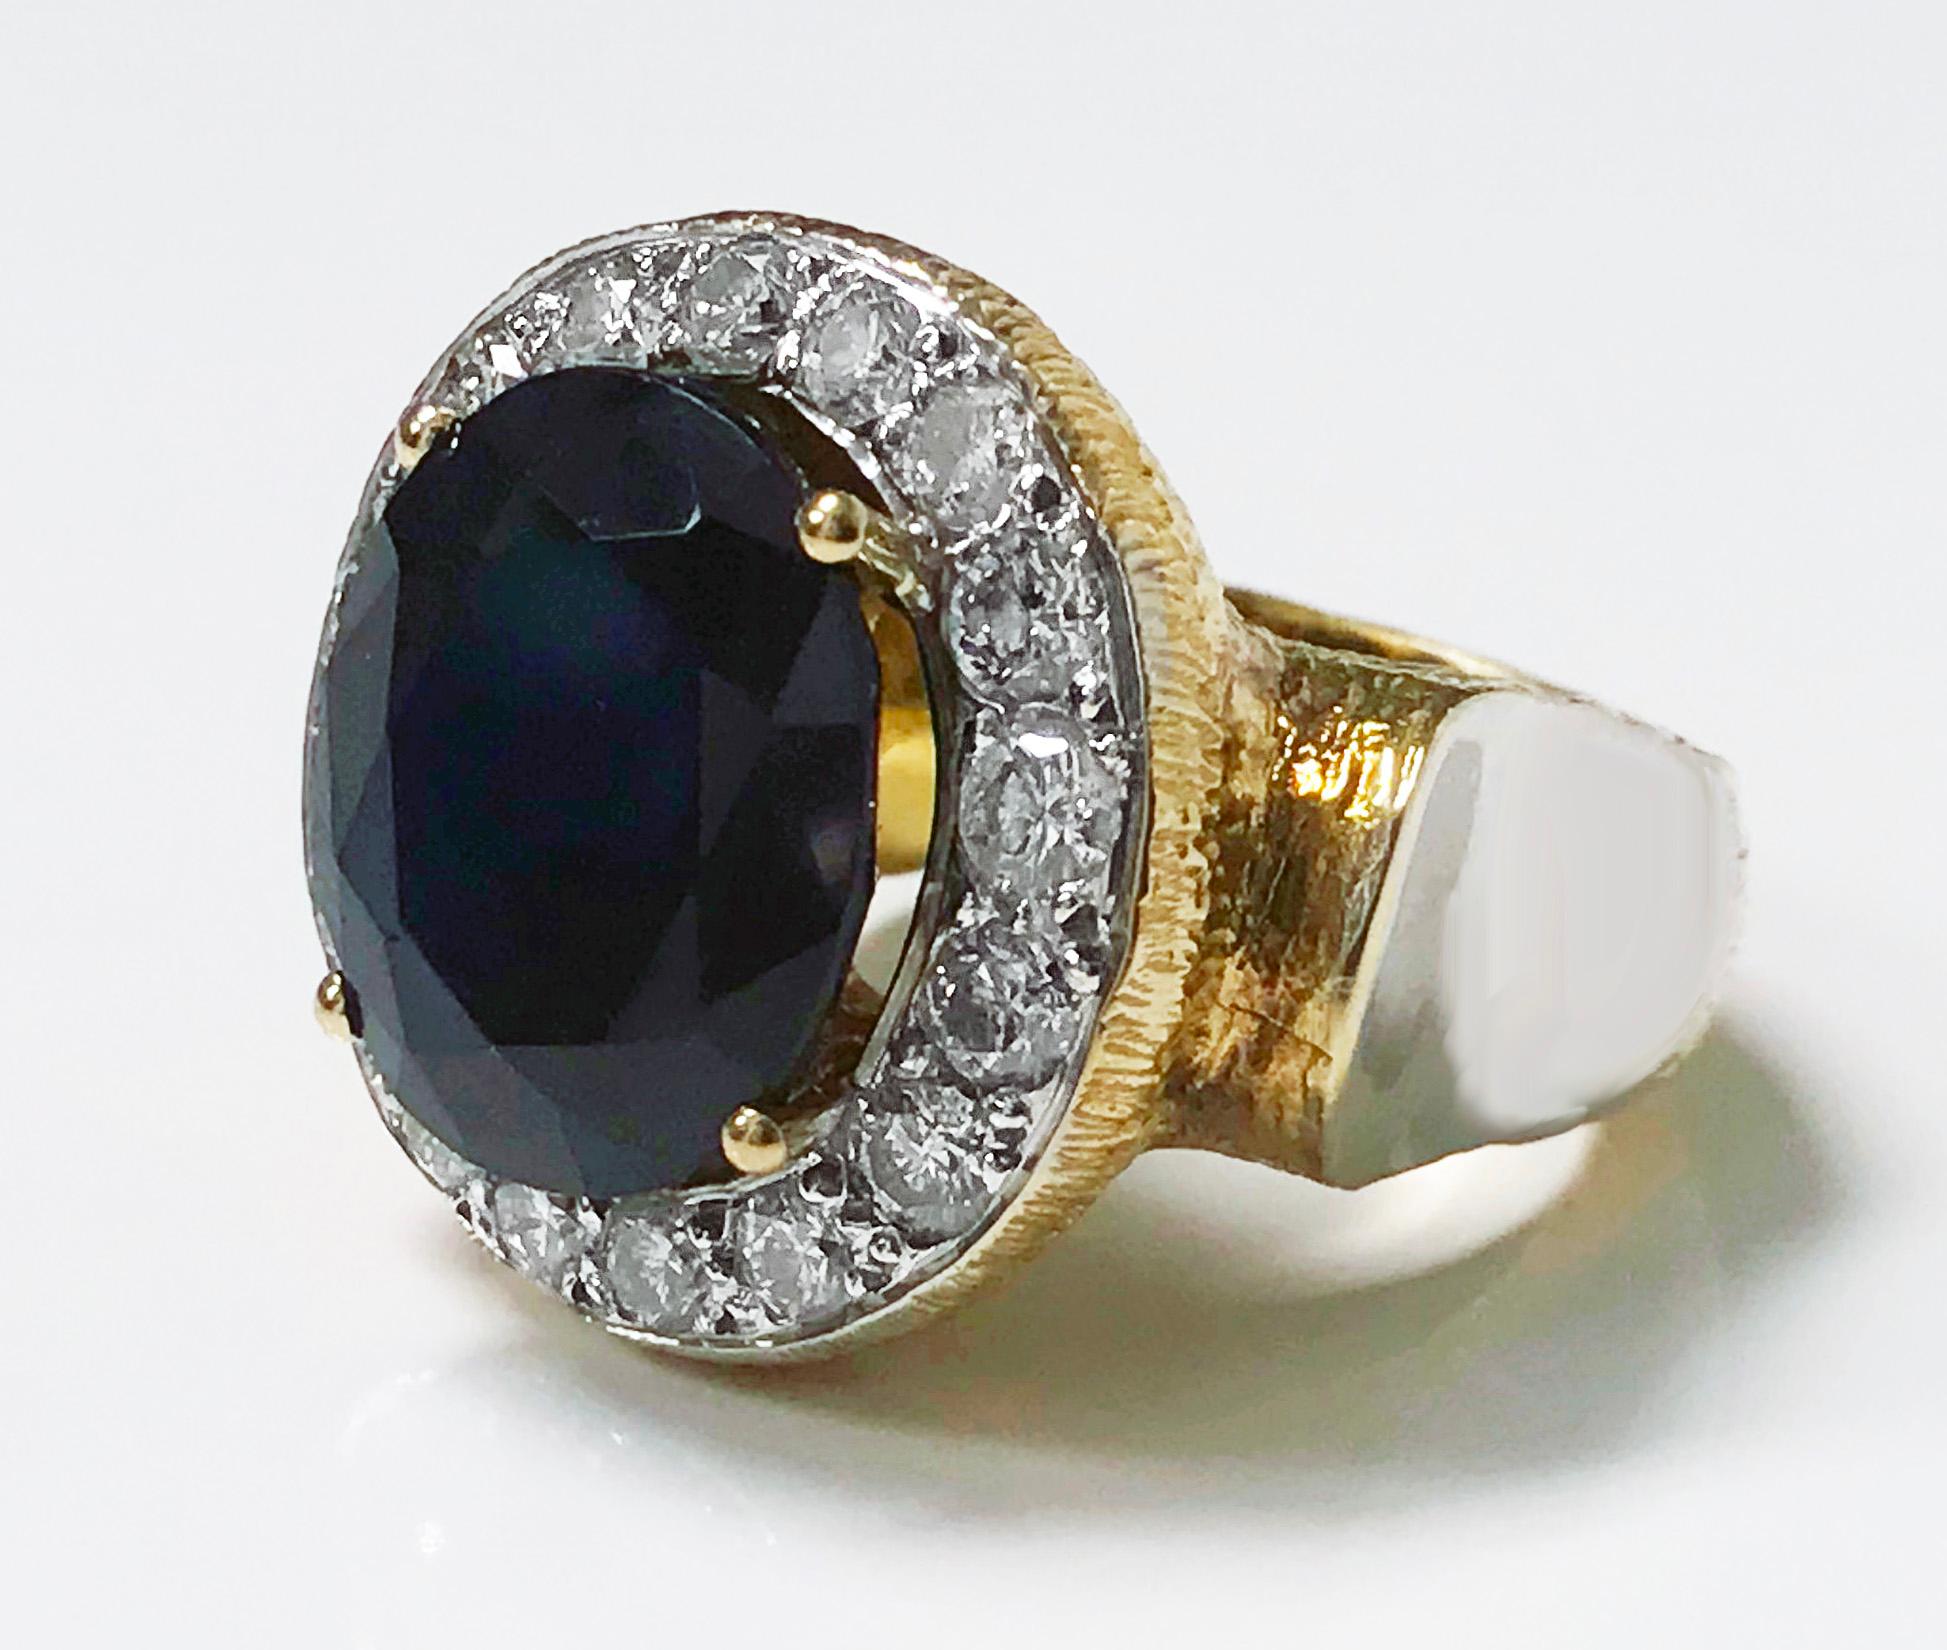 Large 18K Diamond and glass filled sapphire Ring. The ring claw set with a glass filled hybrid corundum semi-translucent sapphire, gauging approximately 16.00 x 13.90 x 8.00 mm, approximately 14.40 cts, with a surround of 16 round brilliant cut